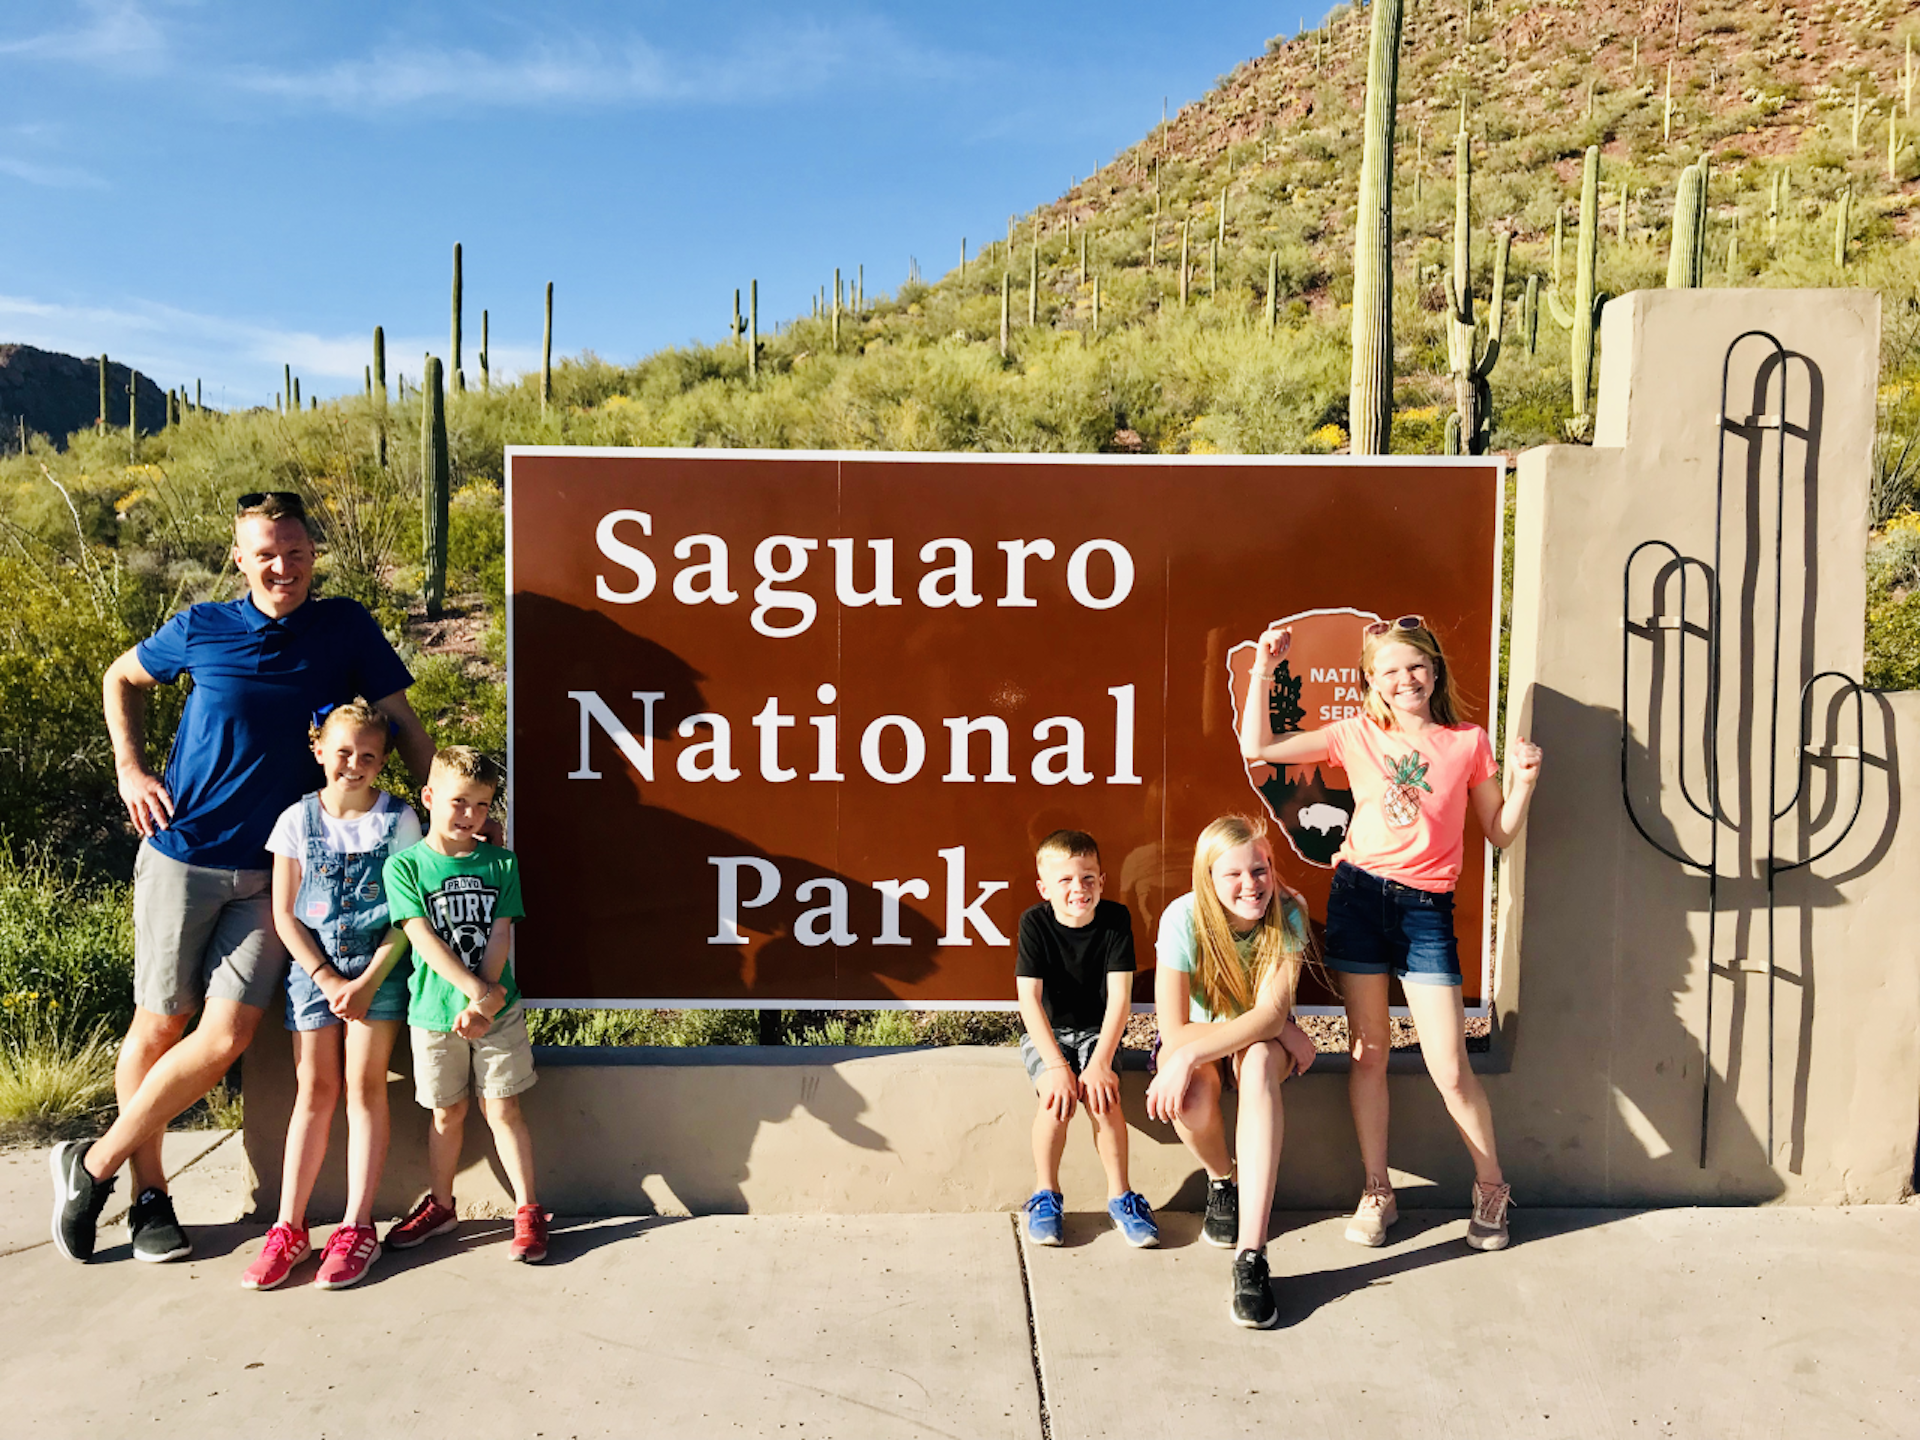 A family with small children stands in front of the entrance sign for Saguaro National Park